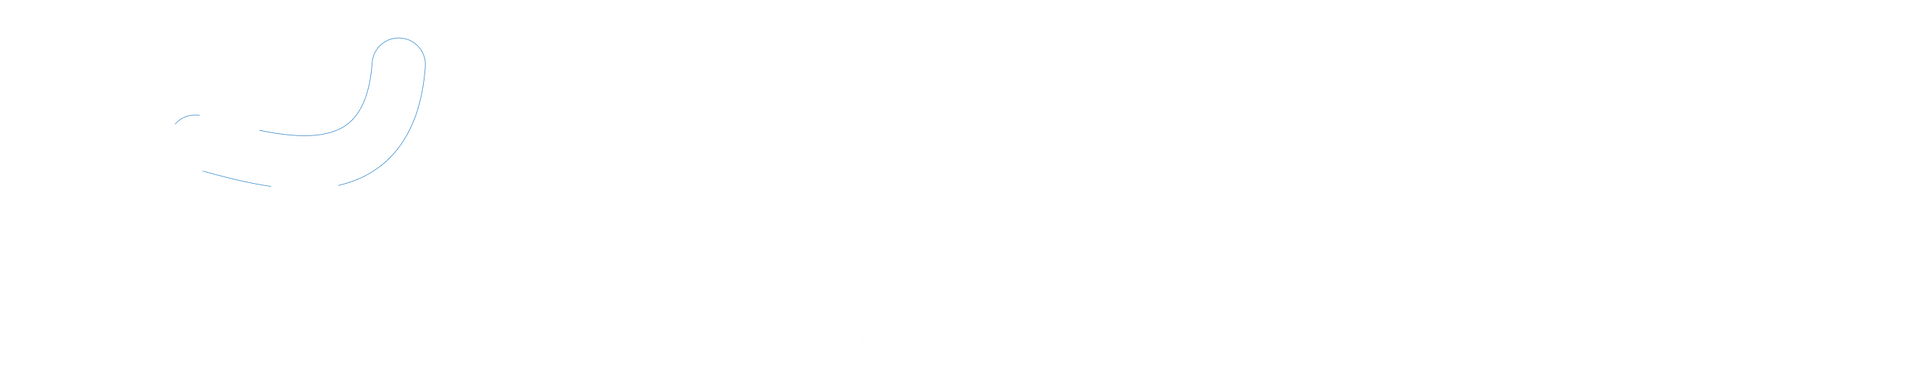 KCPSYCH - Keep Connected Psychology